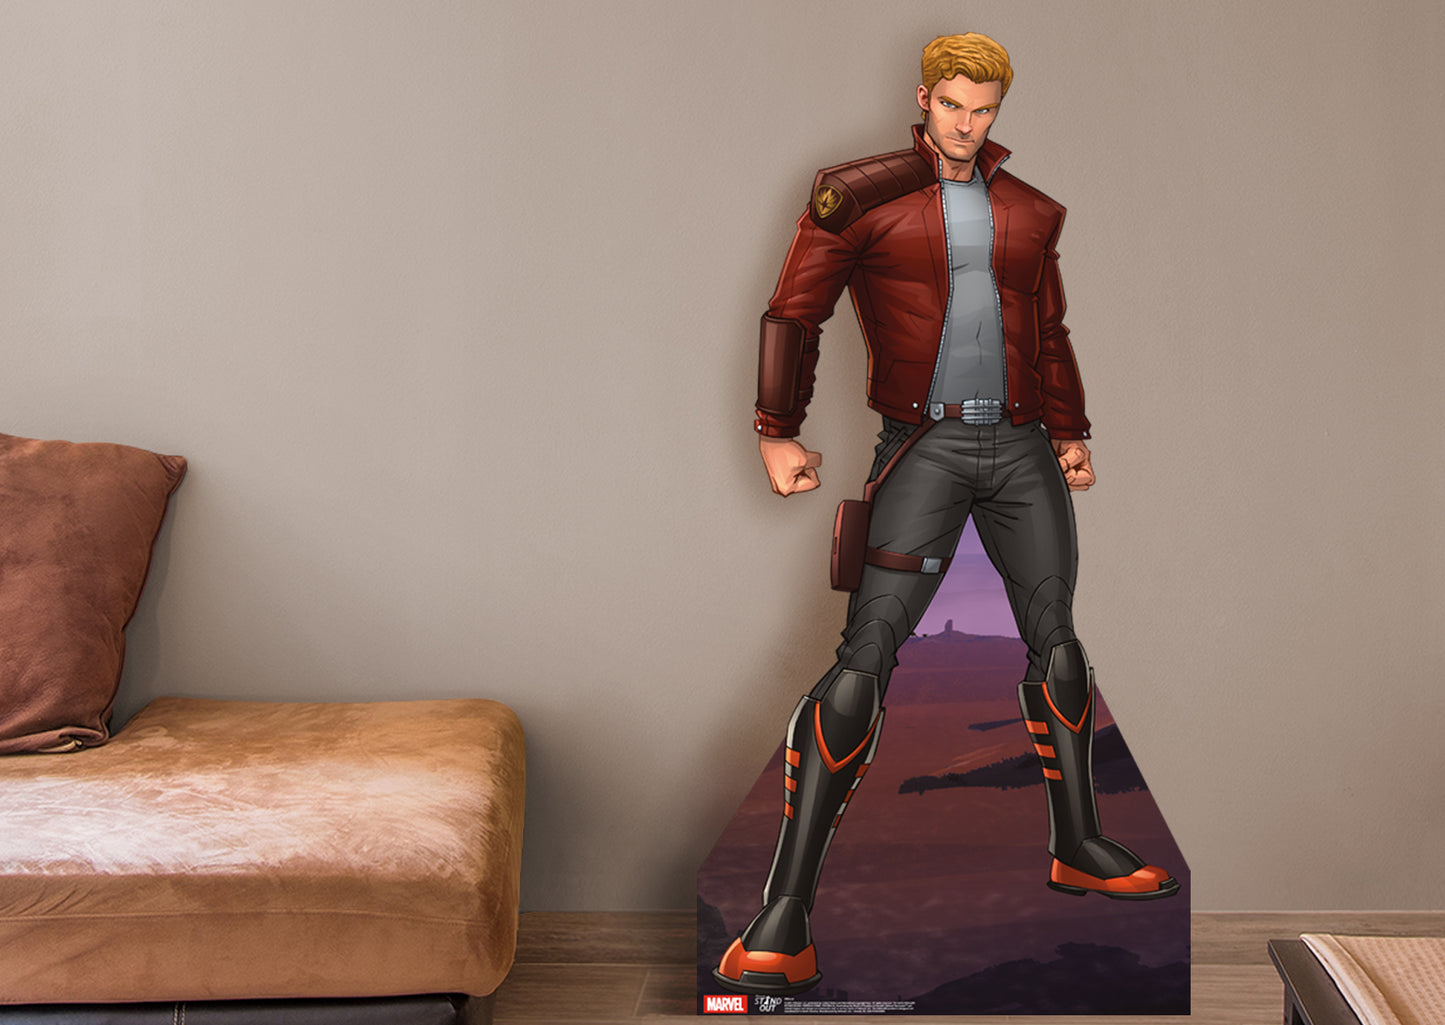 Guardians of the Galaxy: Star-Lord    Foam Core Cutout  - Officially Licensed Marvel    Stand Out